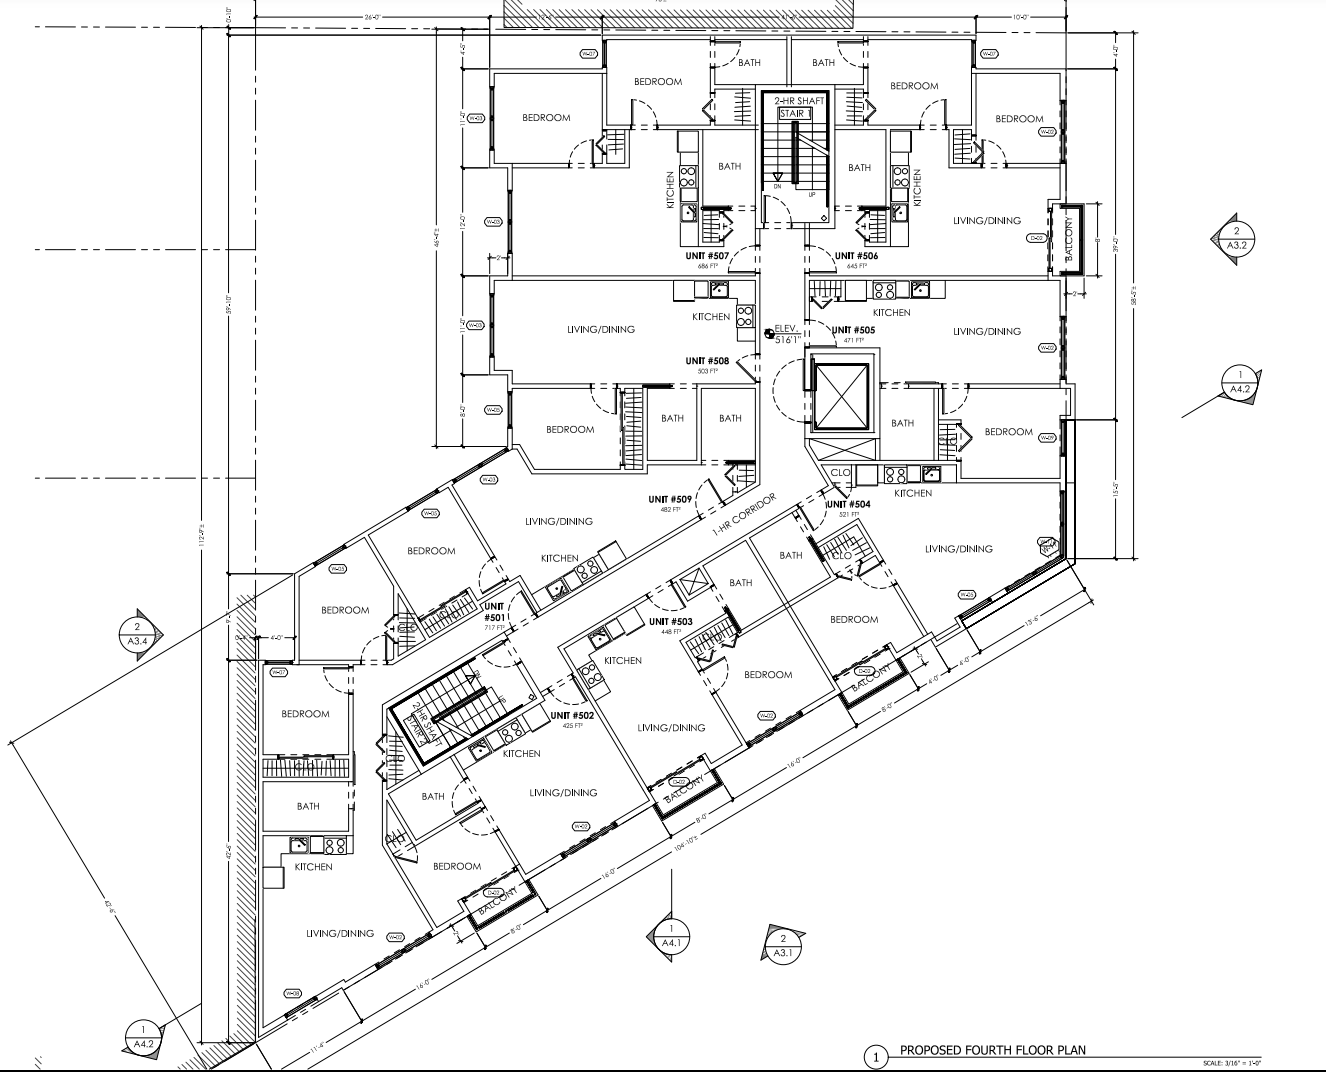 5425 Mission Street Proposed Fourth Floor Plan